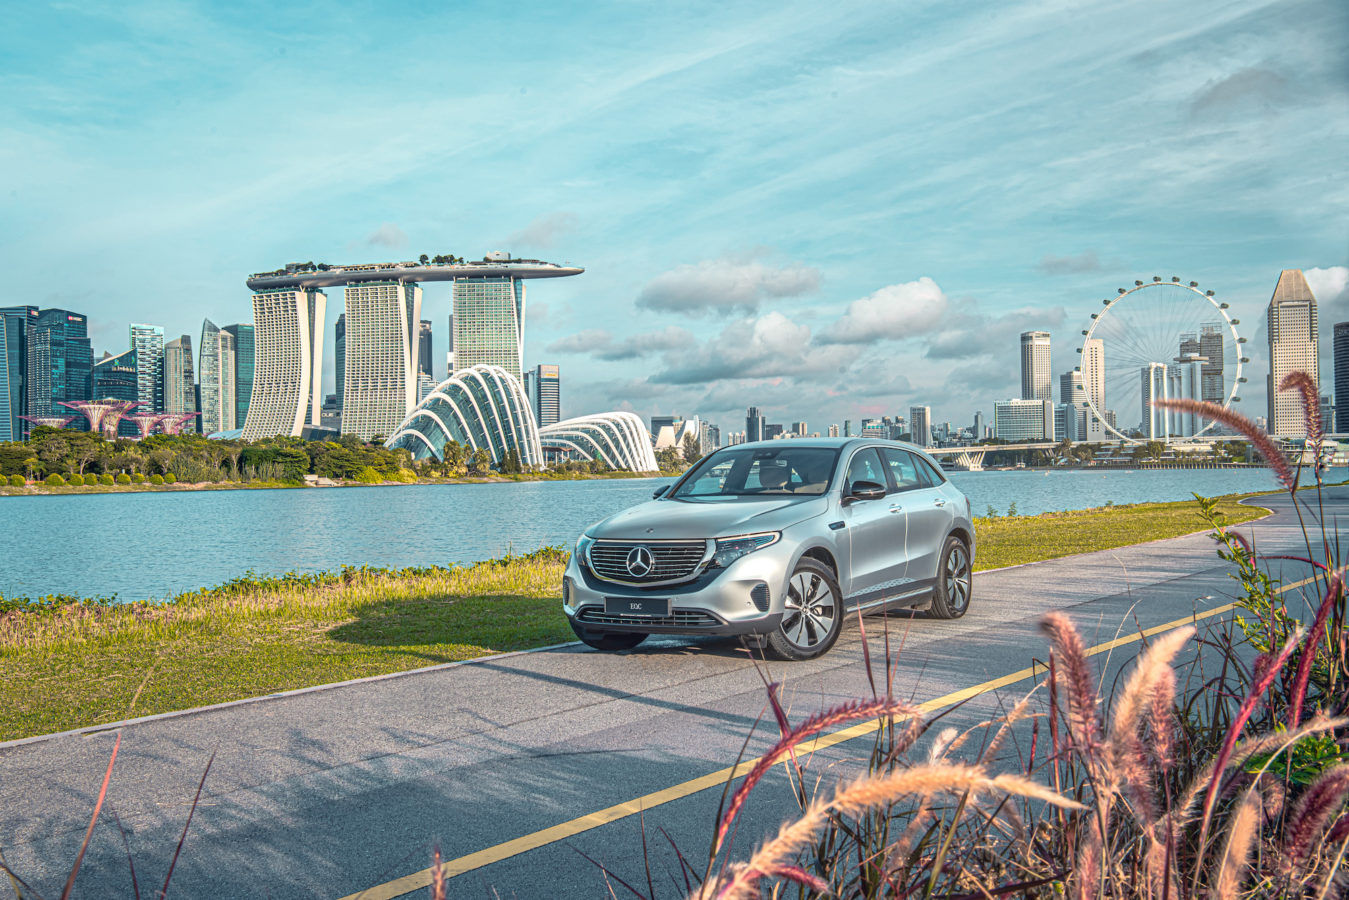 The Mercedes-Benz EQC has finally arrived in Singapore — here’s what you need to know